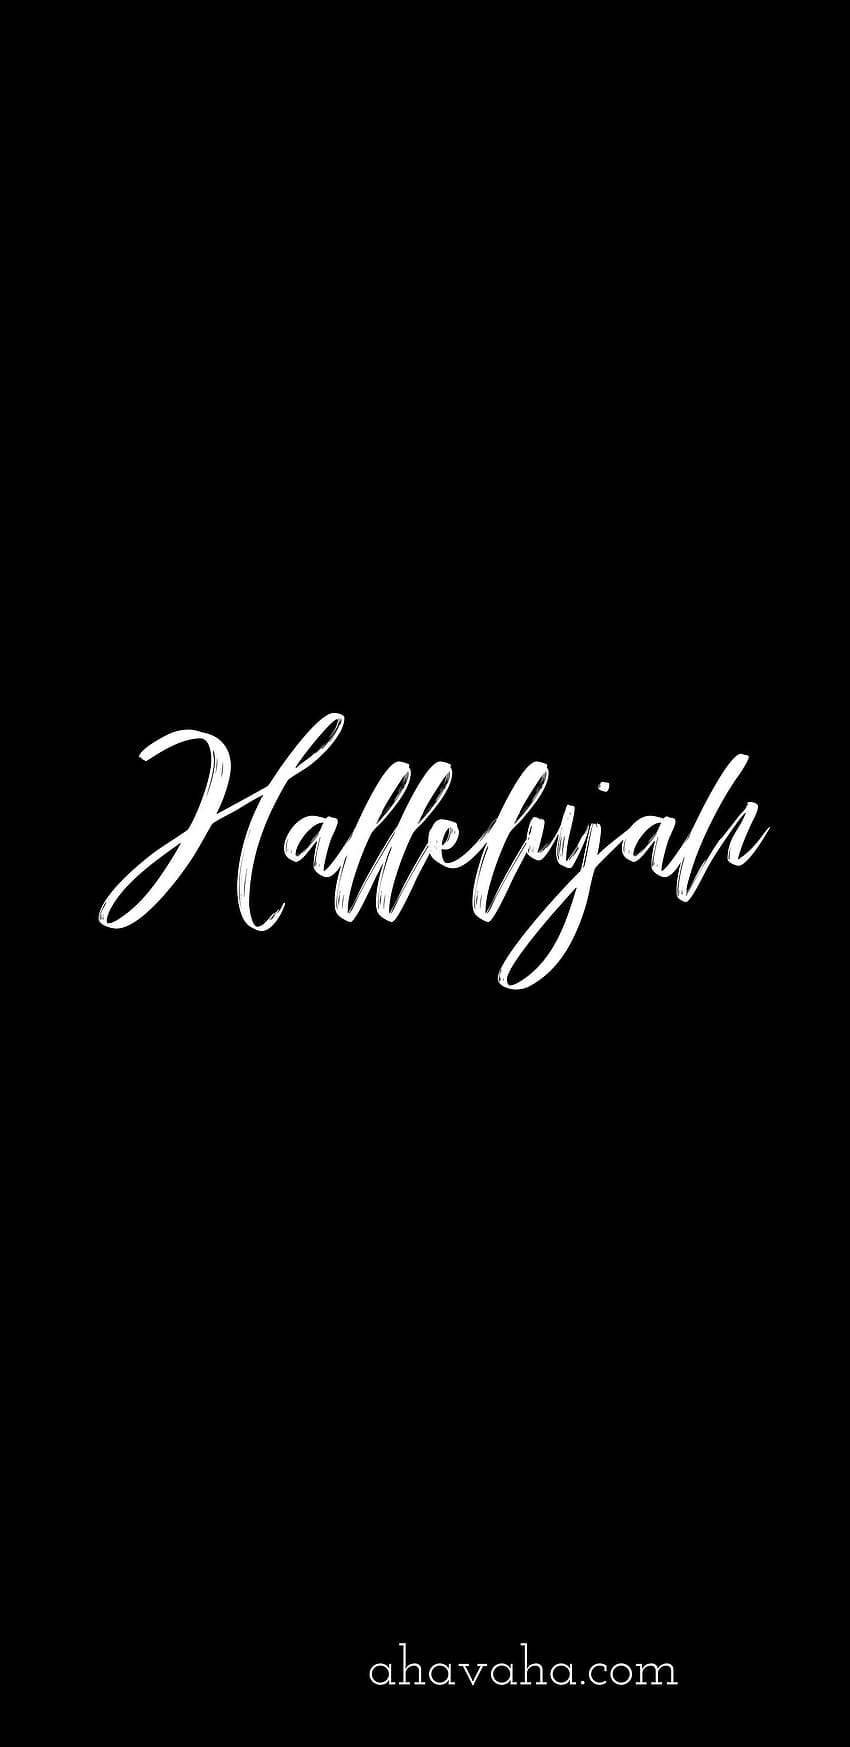 Hallelujah Themed Christian and Screensaver Mobile Phone Black Backgrounds 1 HD phone wallpaper